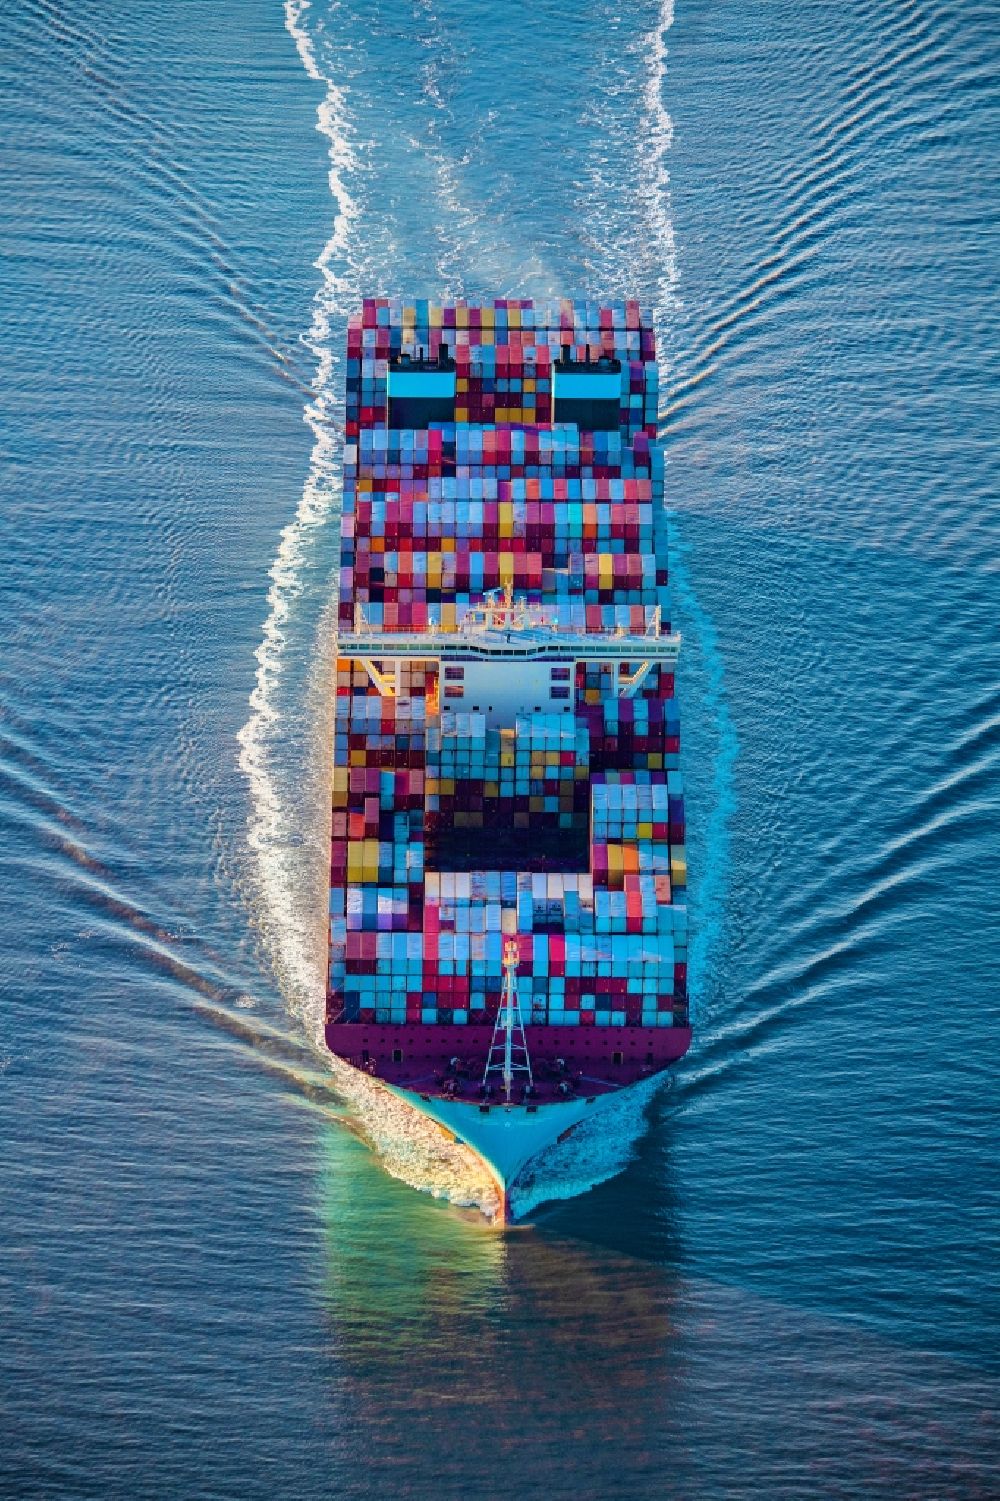 Aerial photograph Butjadingen - Moving container ship Maribor Maersk in the Weser estuary in Butjadingen in the state Lower Saxony, Germany